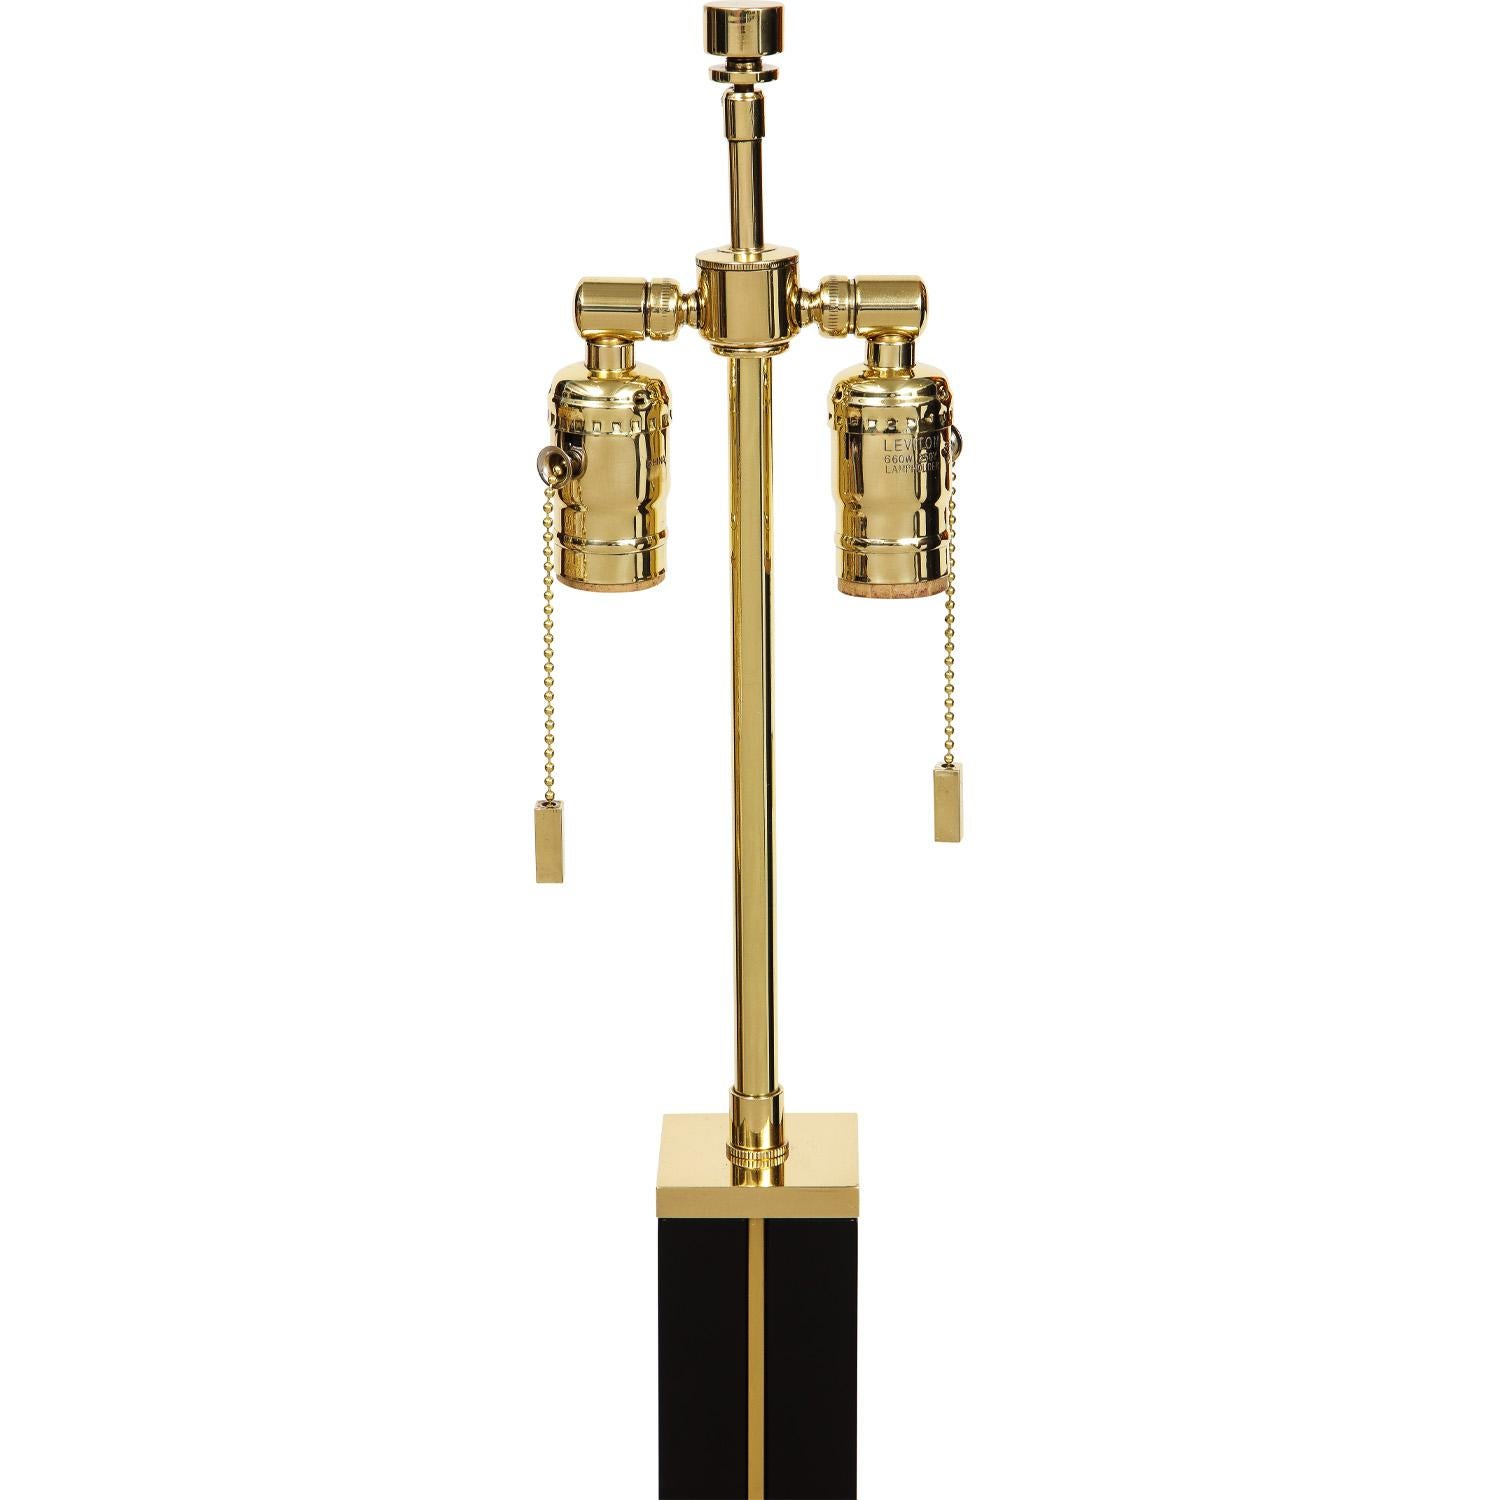 American Karl Springer Exquisite Pair of Floor Lamps in Black Lacquer and Brass 1980s For Sale